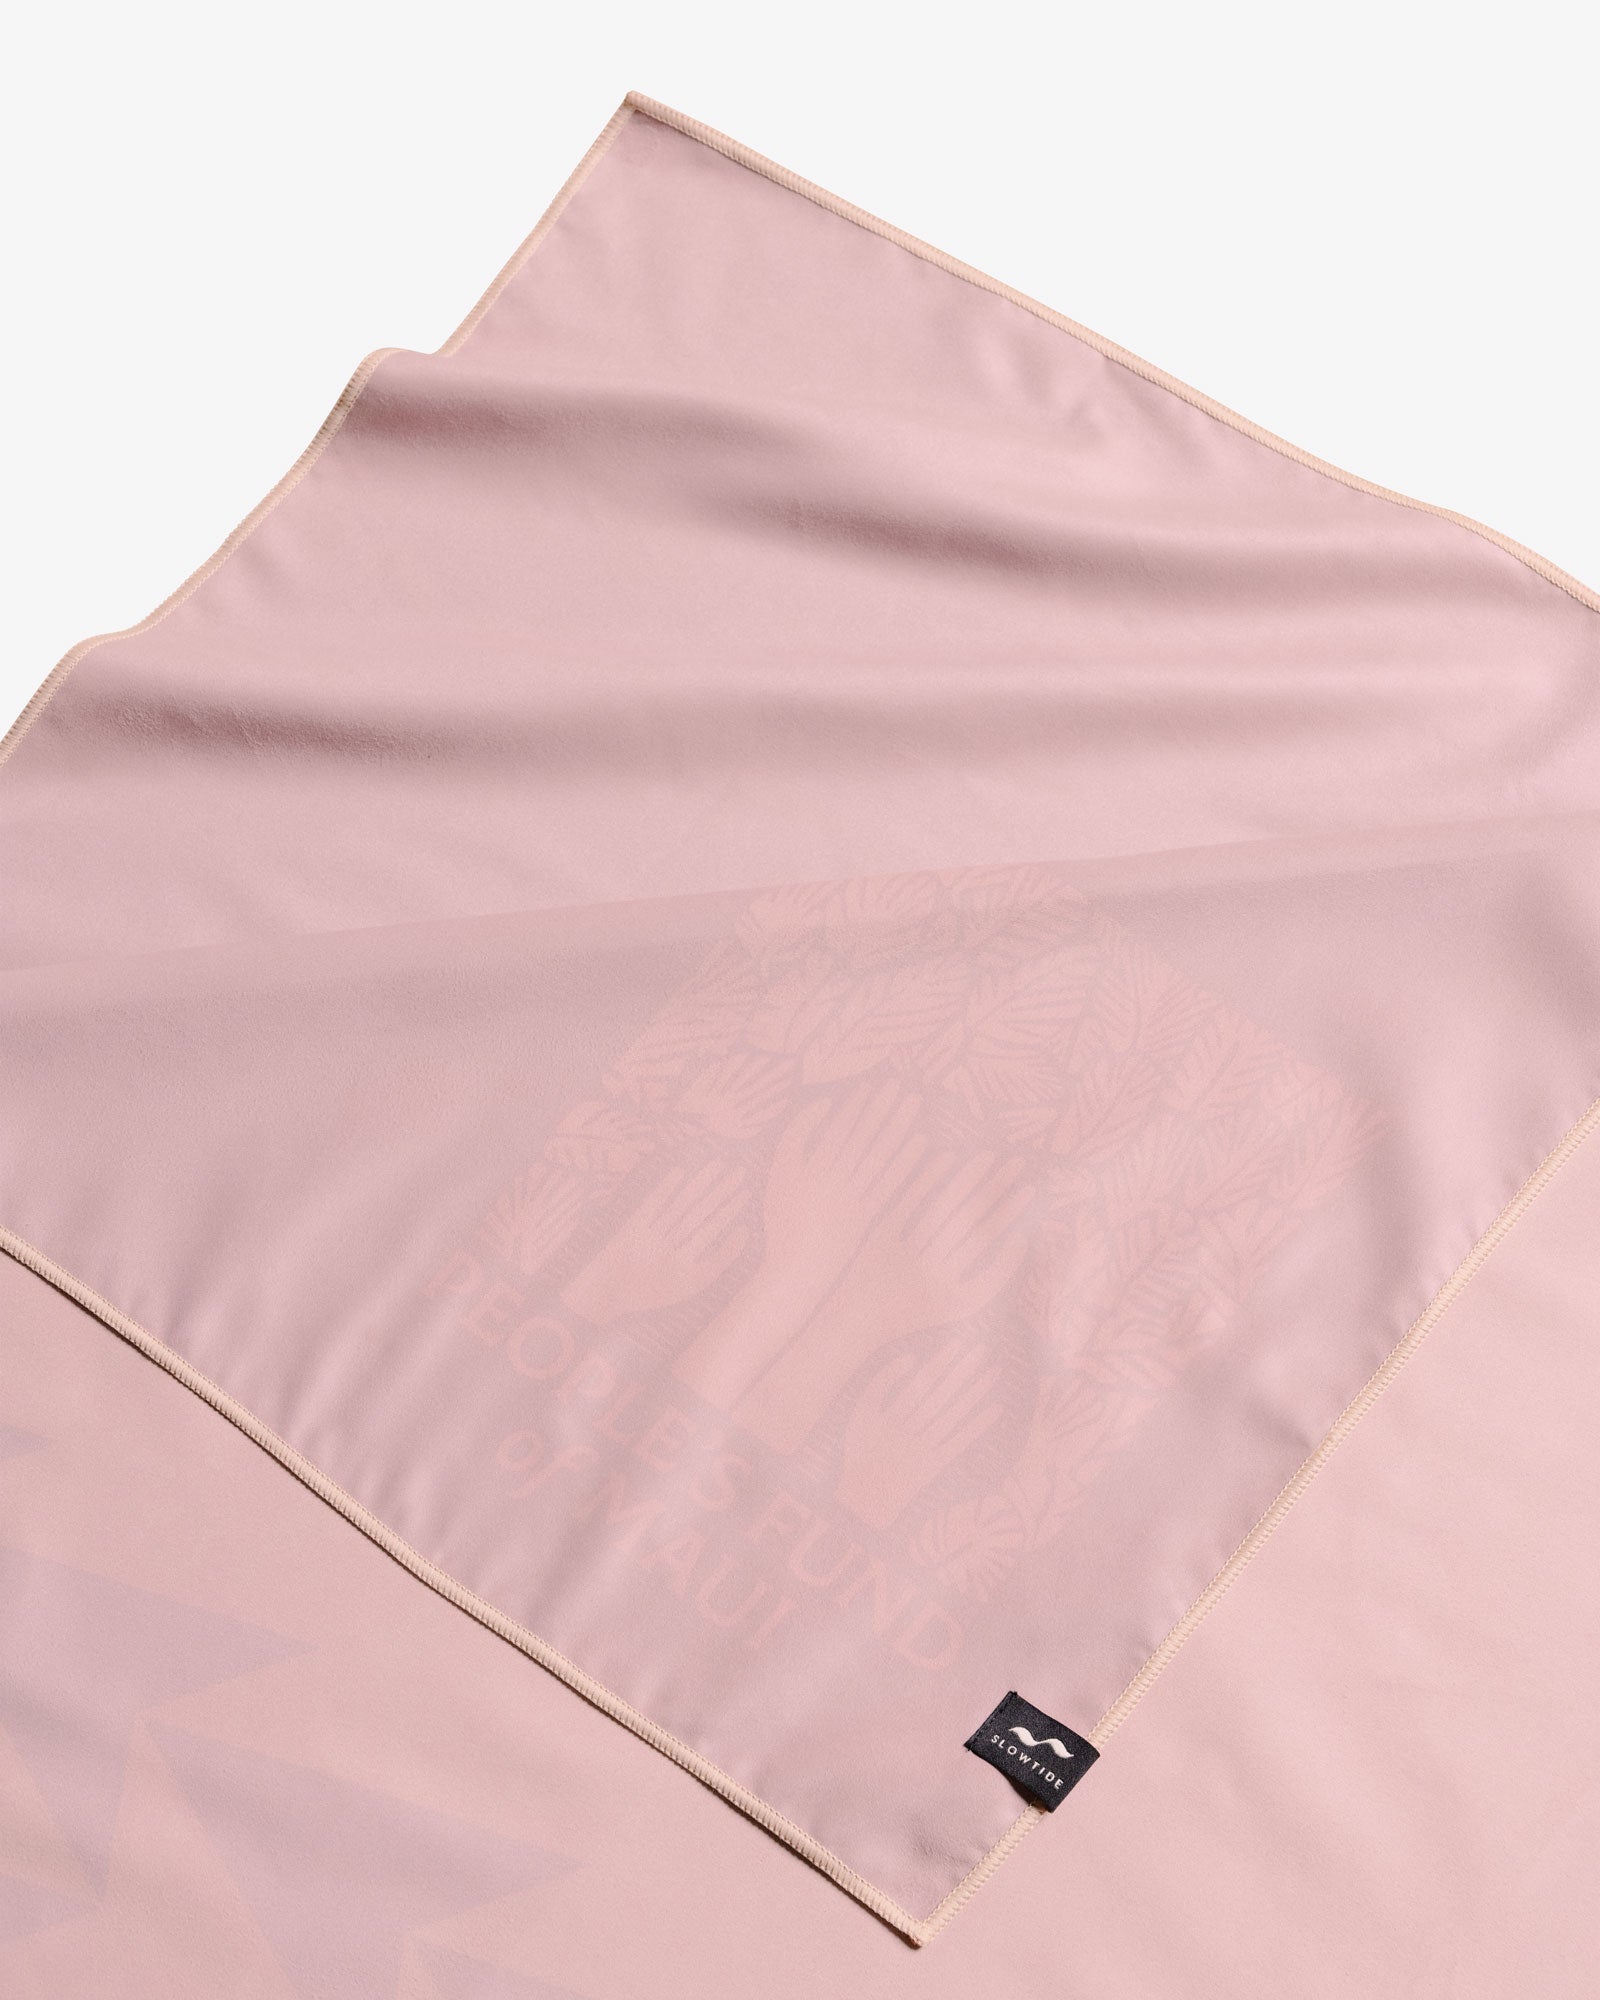 People's Fund of Maui Quick Dry Towel (Slowtide) - Pink / Pink - - So iLL - Slowtide